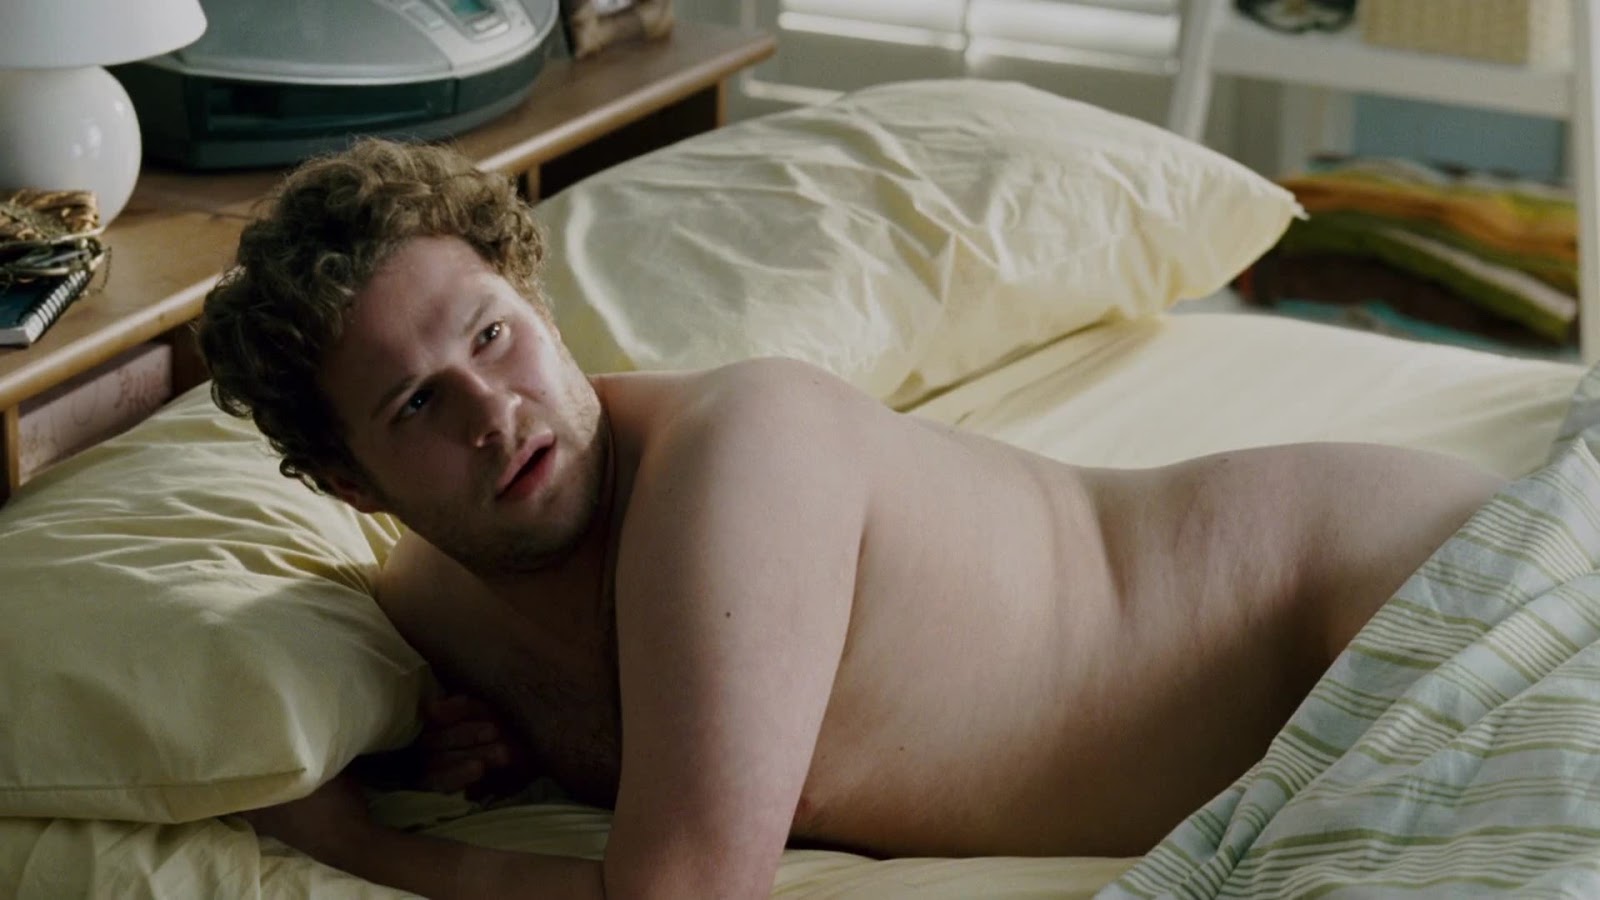 Seth Rogen nude in Knocked Up.